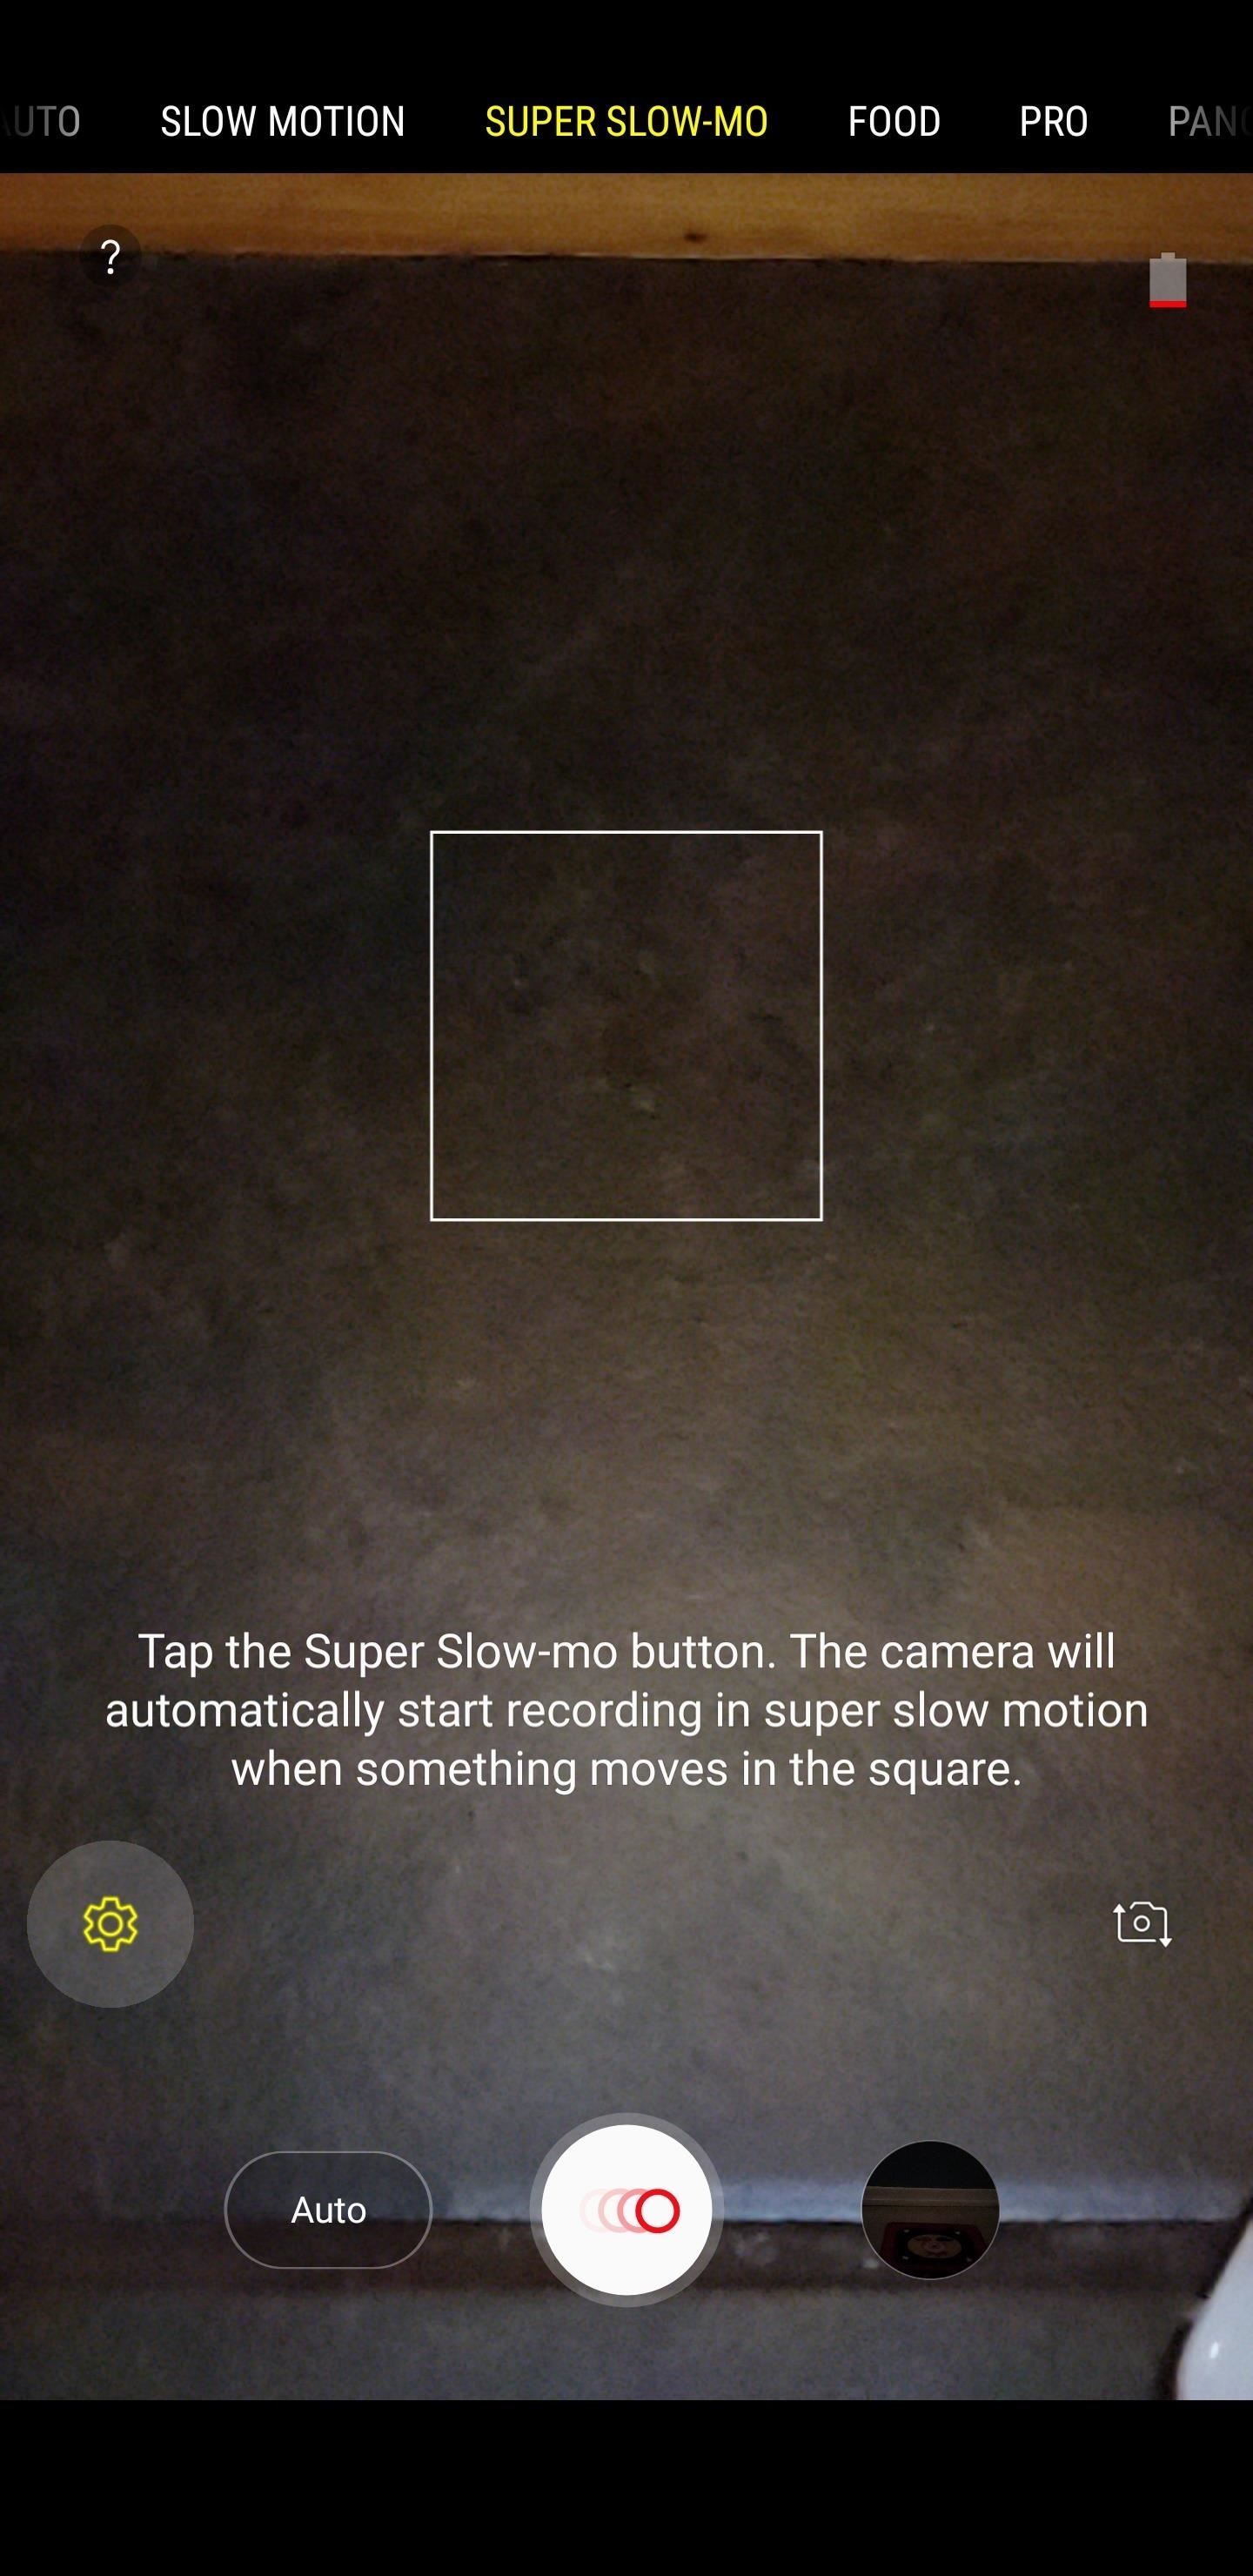 10 Tips for Using Samsung's Super Slow-Mo Camera Like a Pro